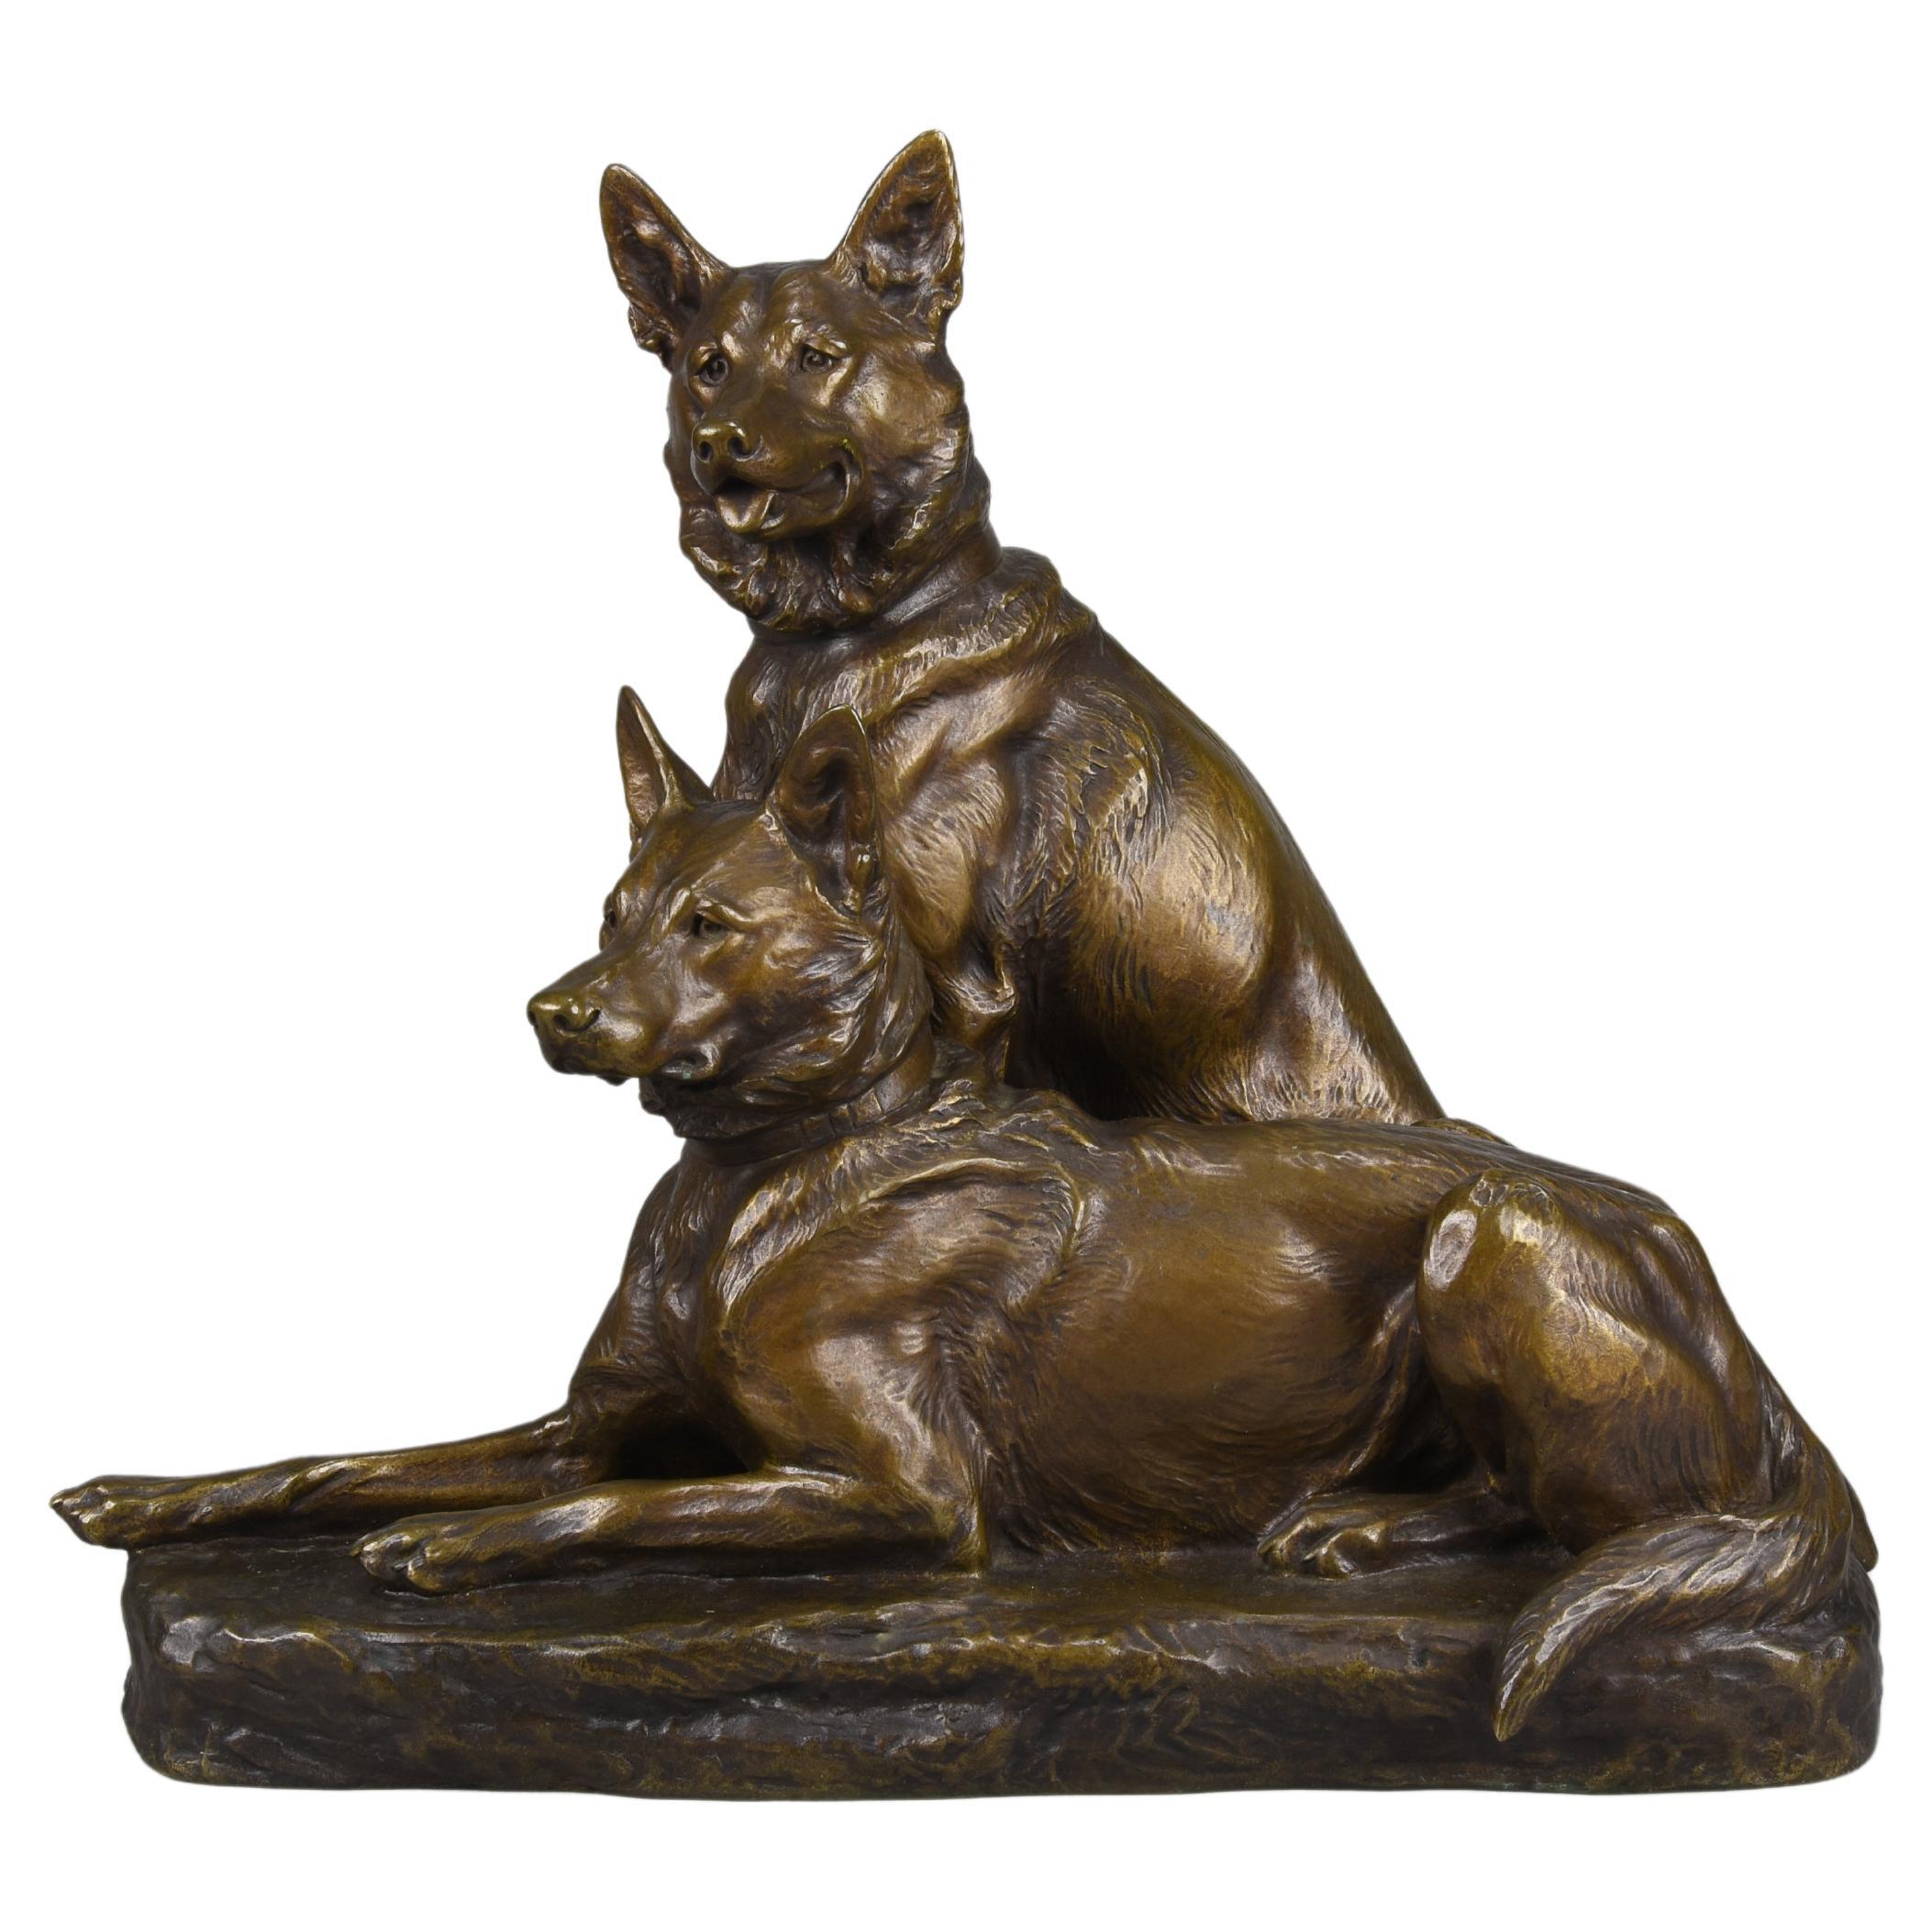 Early-20th Century Animaliers Bronze Entitled "Two Alsatians" by Louis Riché For Sale